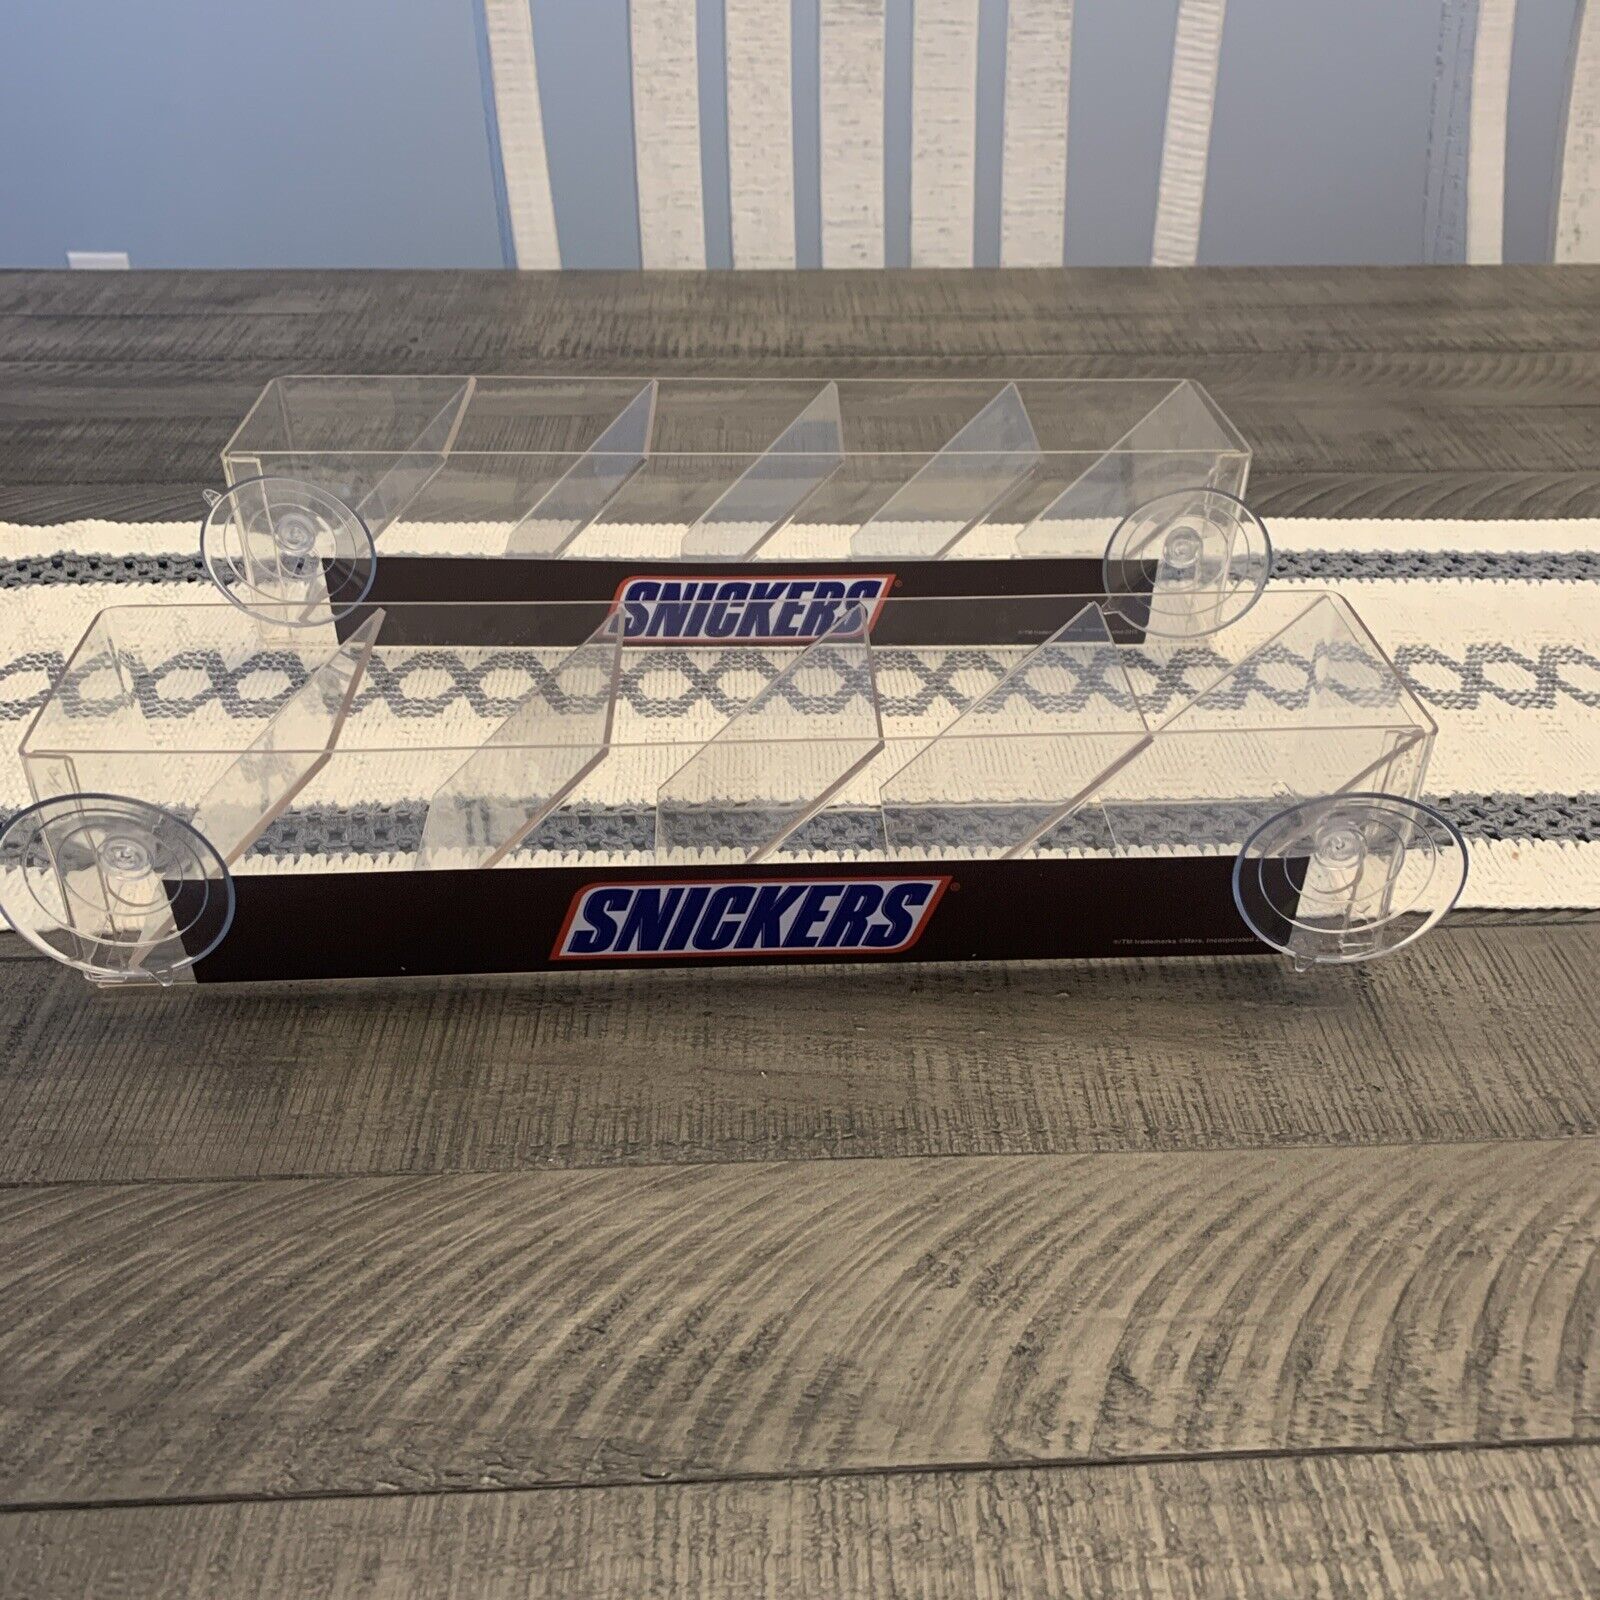 2 Snickers Advertising Suction Cup Display  Candy Bar Stands  Advertising 2015